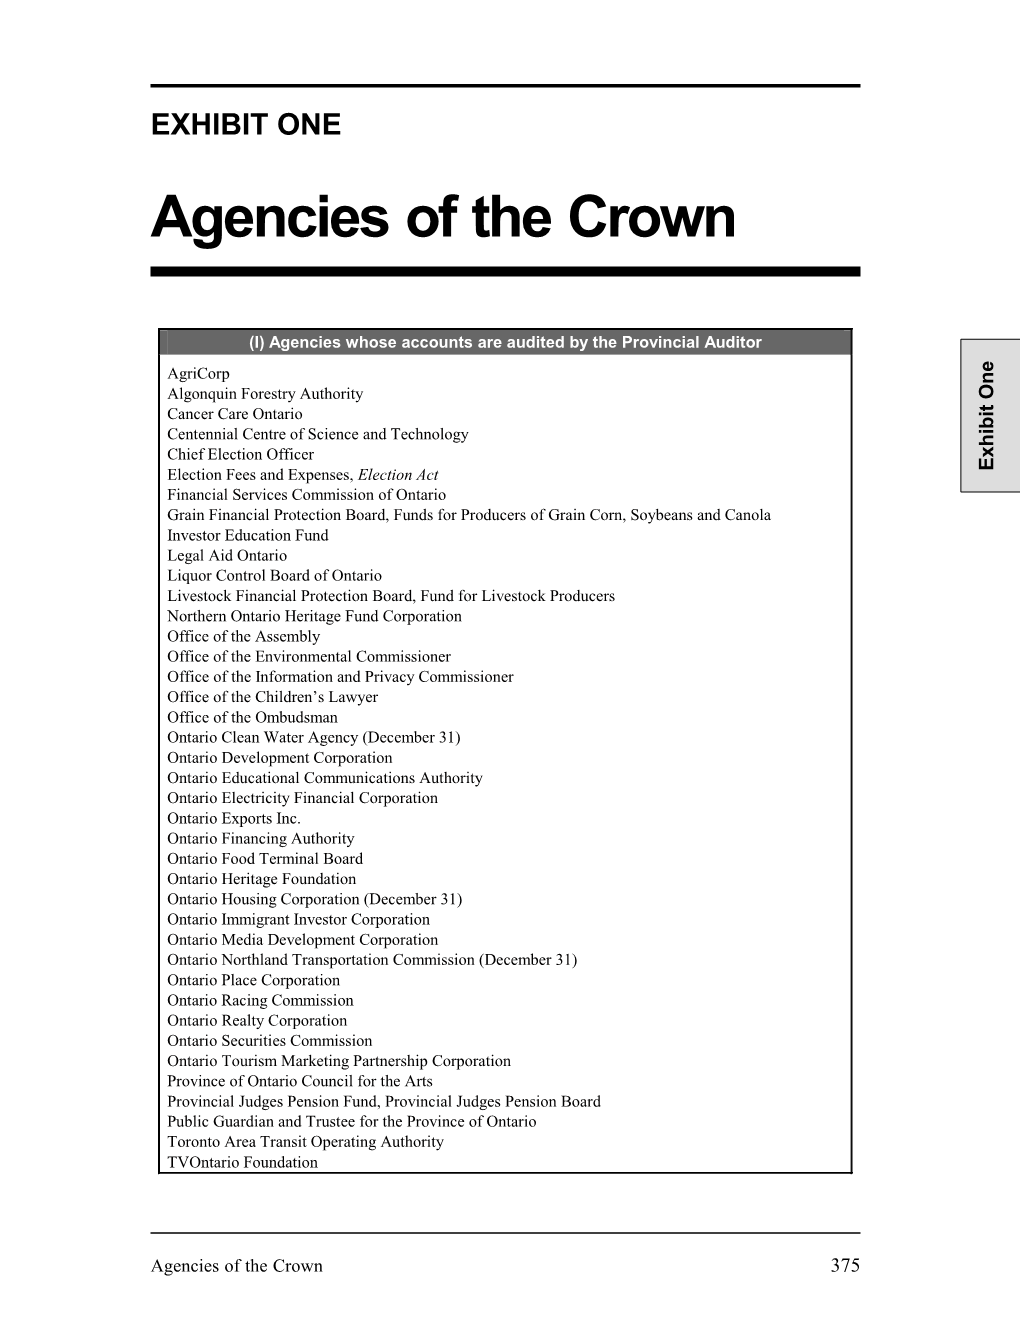 2001 Provincial Auditor's Report: Exhibit 1: Agencies of the Crown